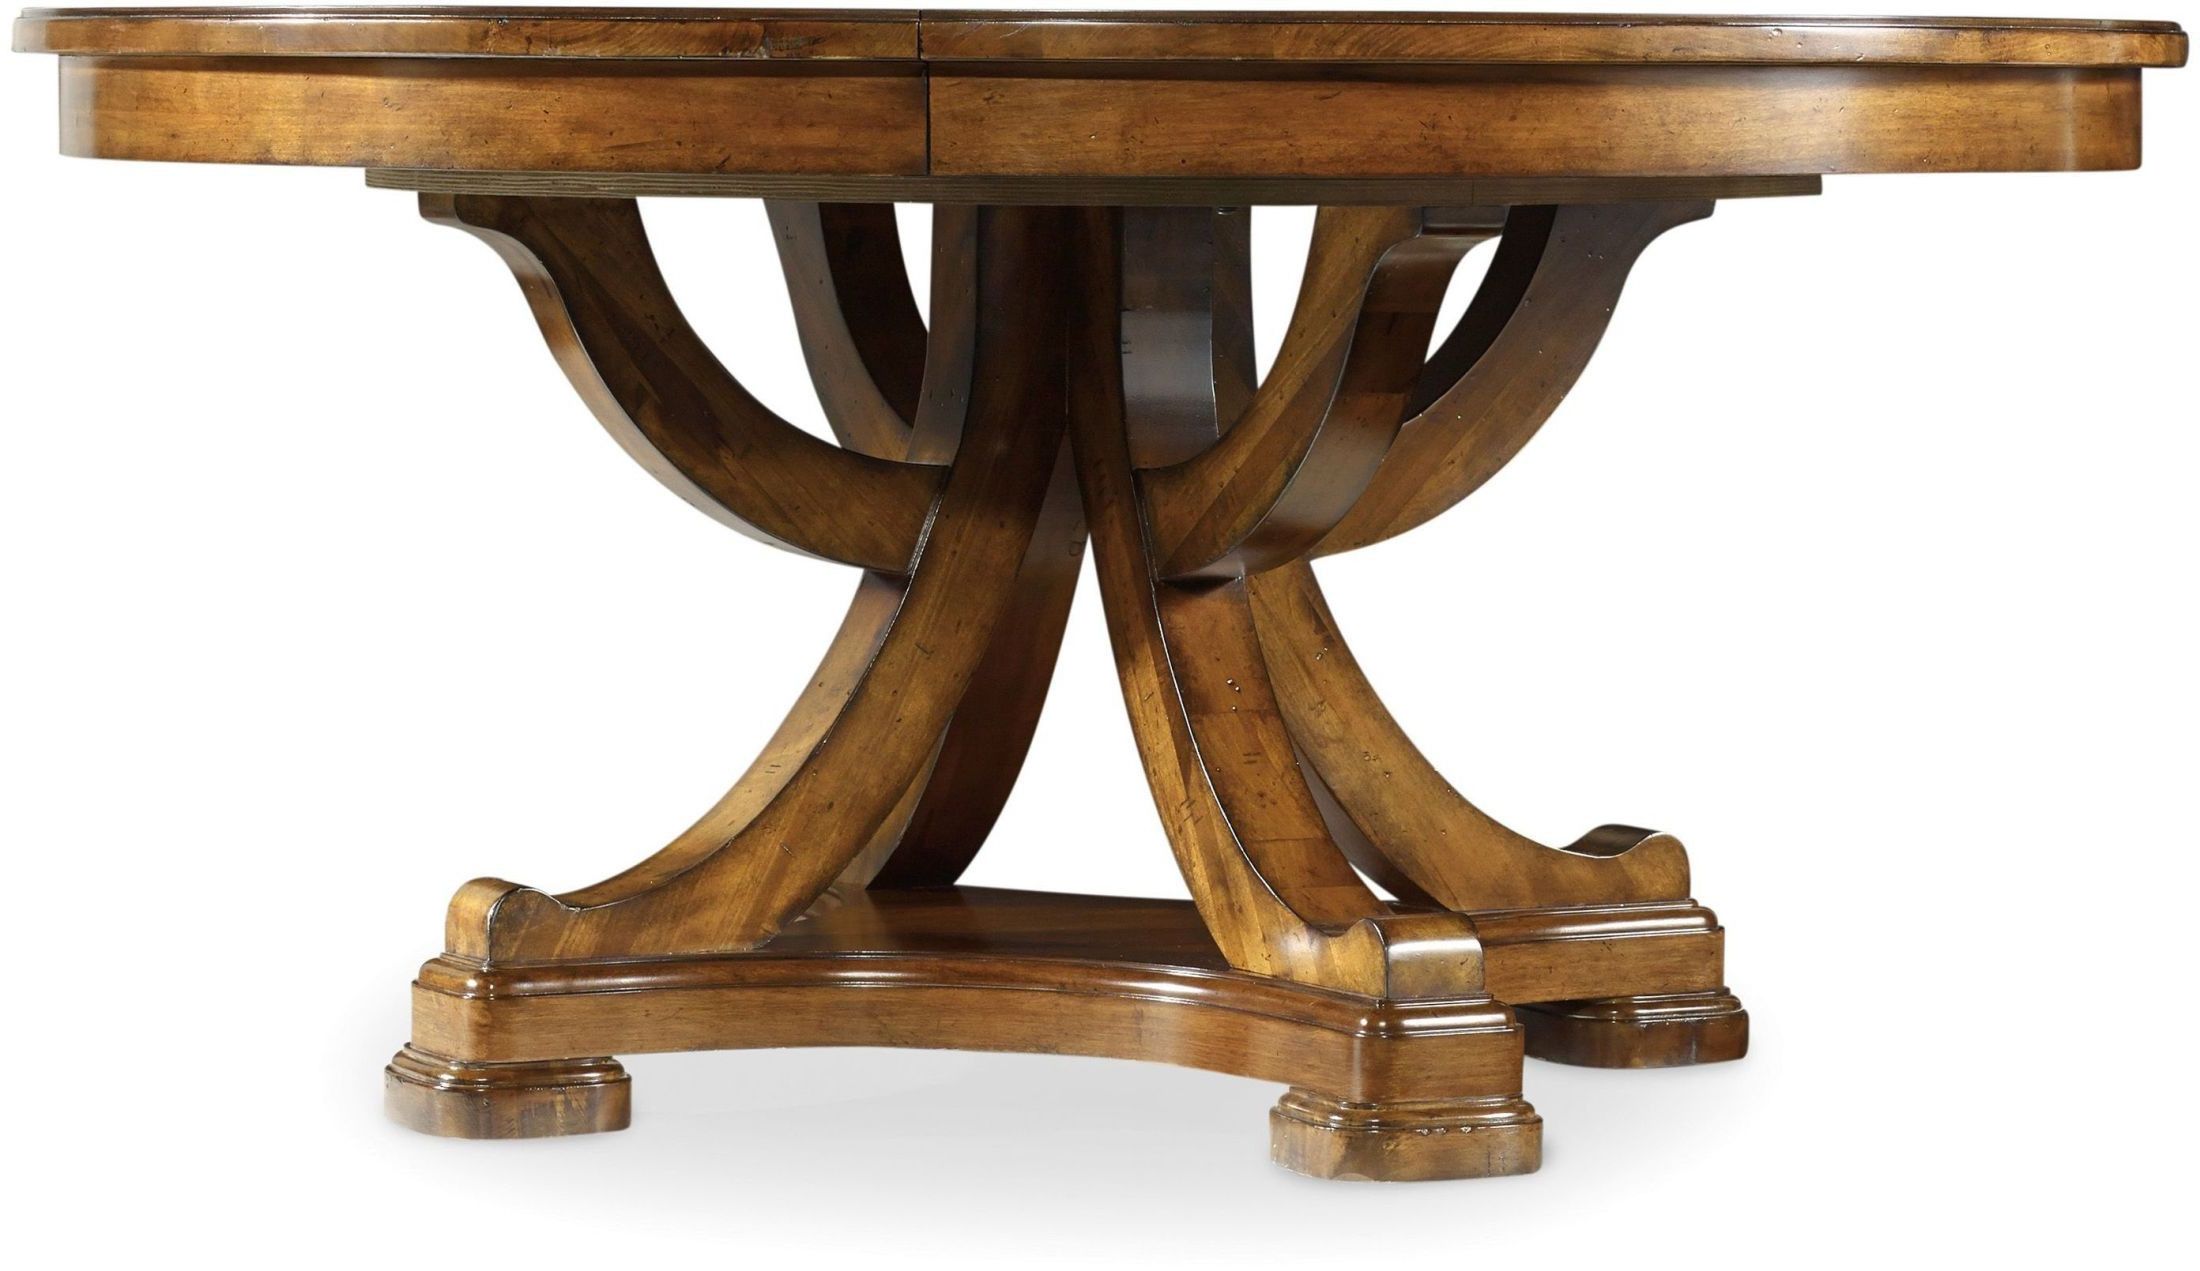 Tynecastle Brown Round Pedestal Extendable Dining Table For Most Popular Kirt Pedestal Dining Tables (View 12 of 20)